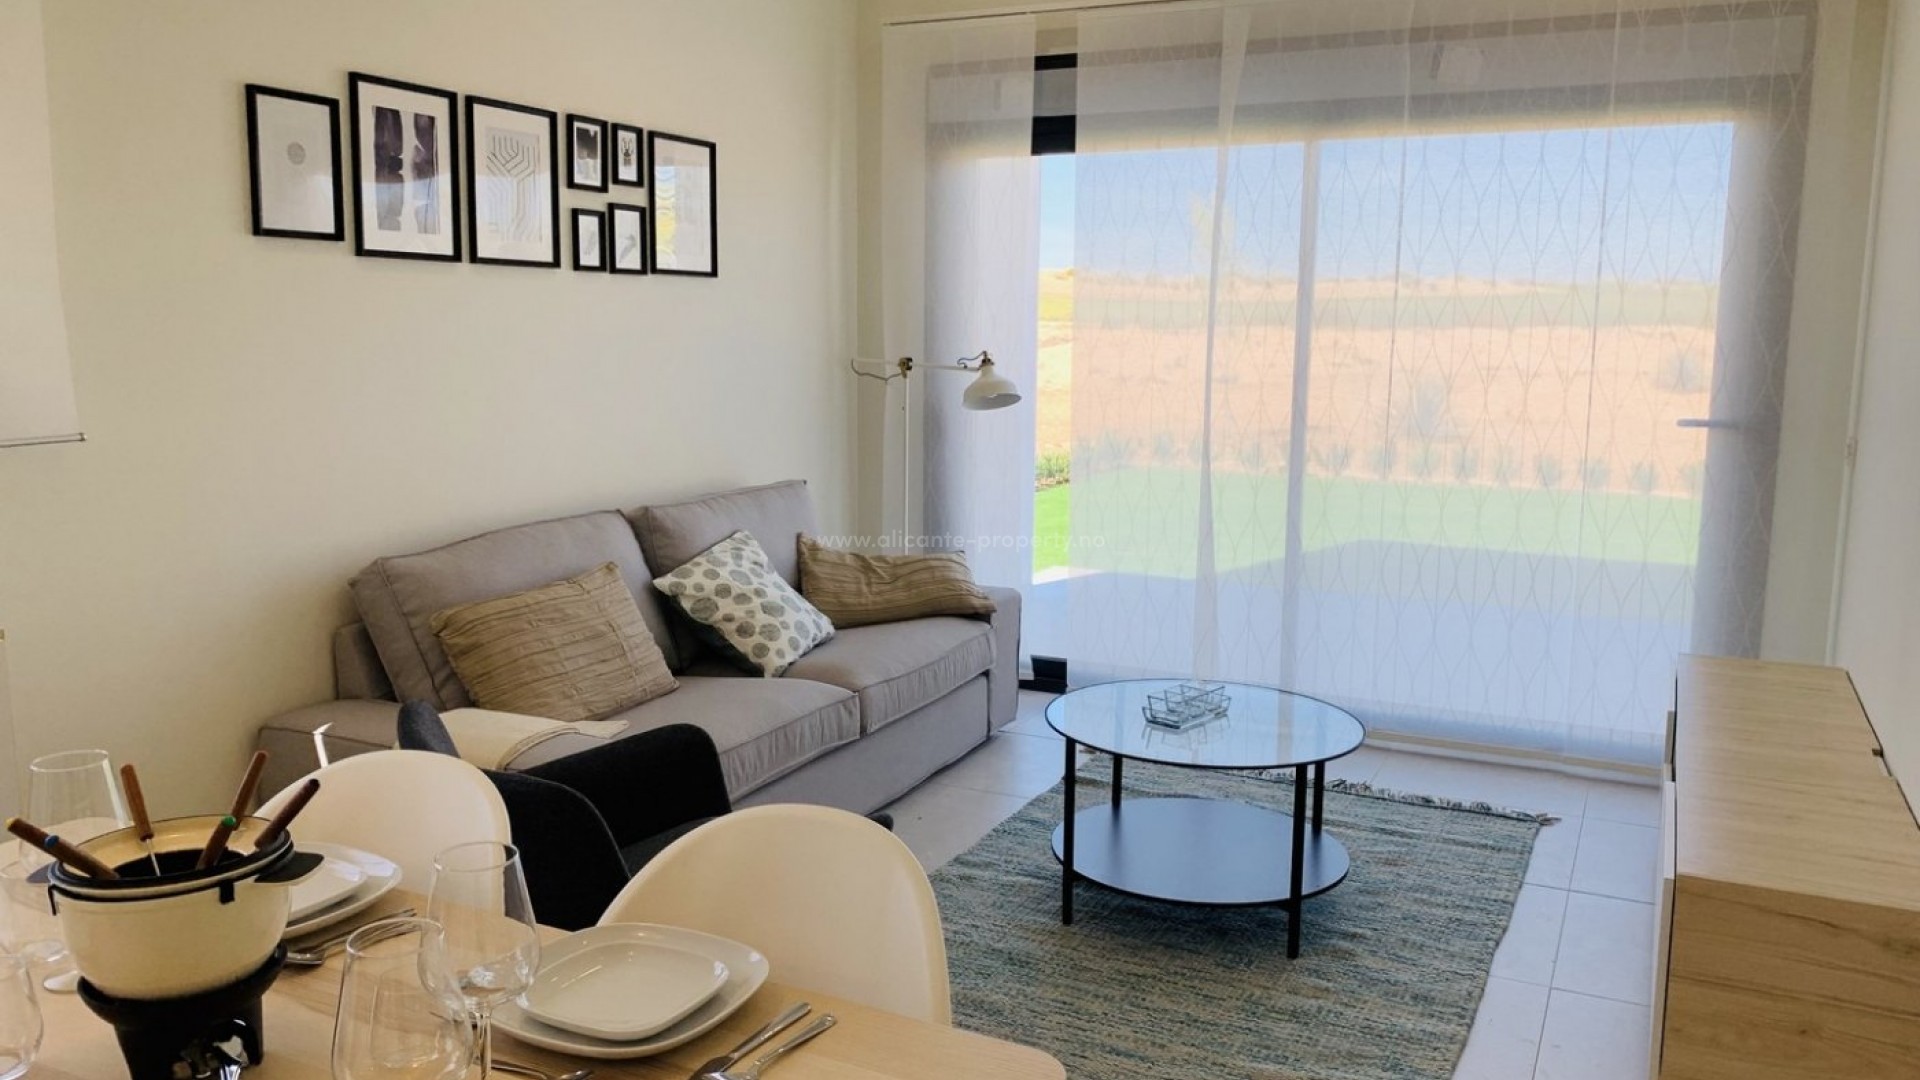 New apartments in Condado de Alhama Golf course, two bedrooms and two bathrooms with golf view. ALHAMA SIGNATURE GOLF, a fabulous 18-hole golf course.